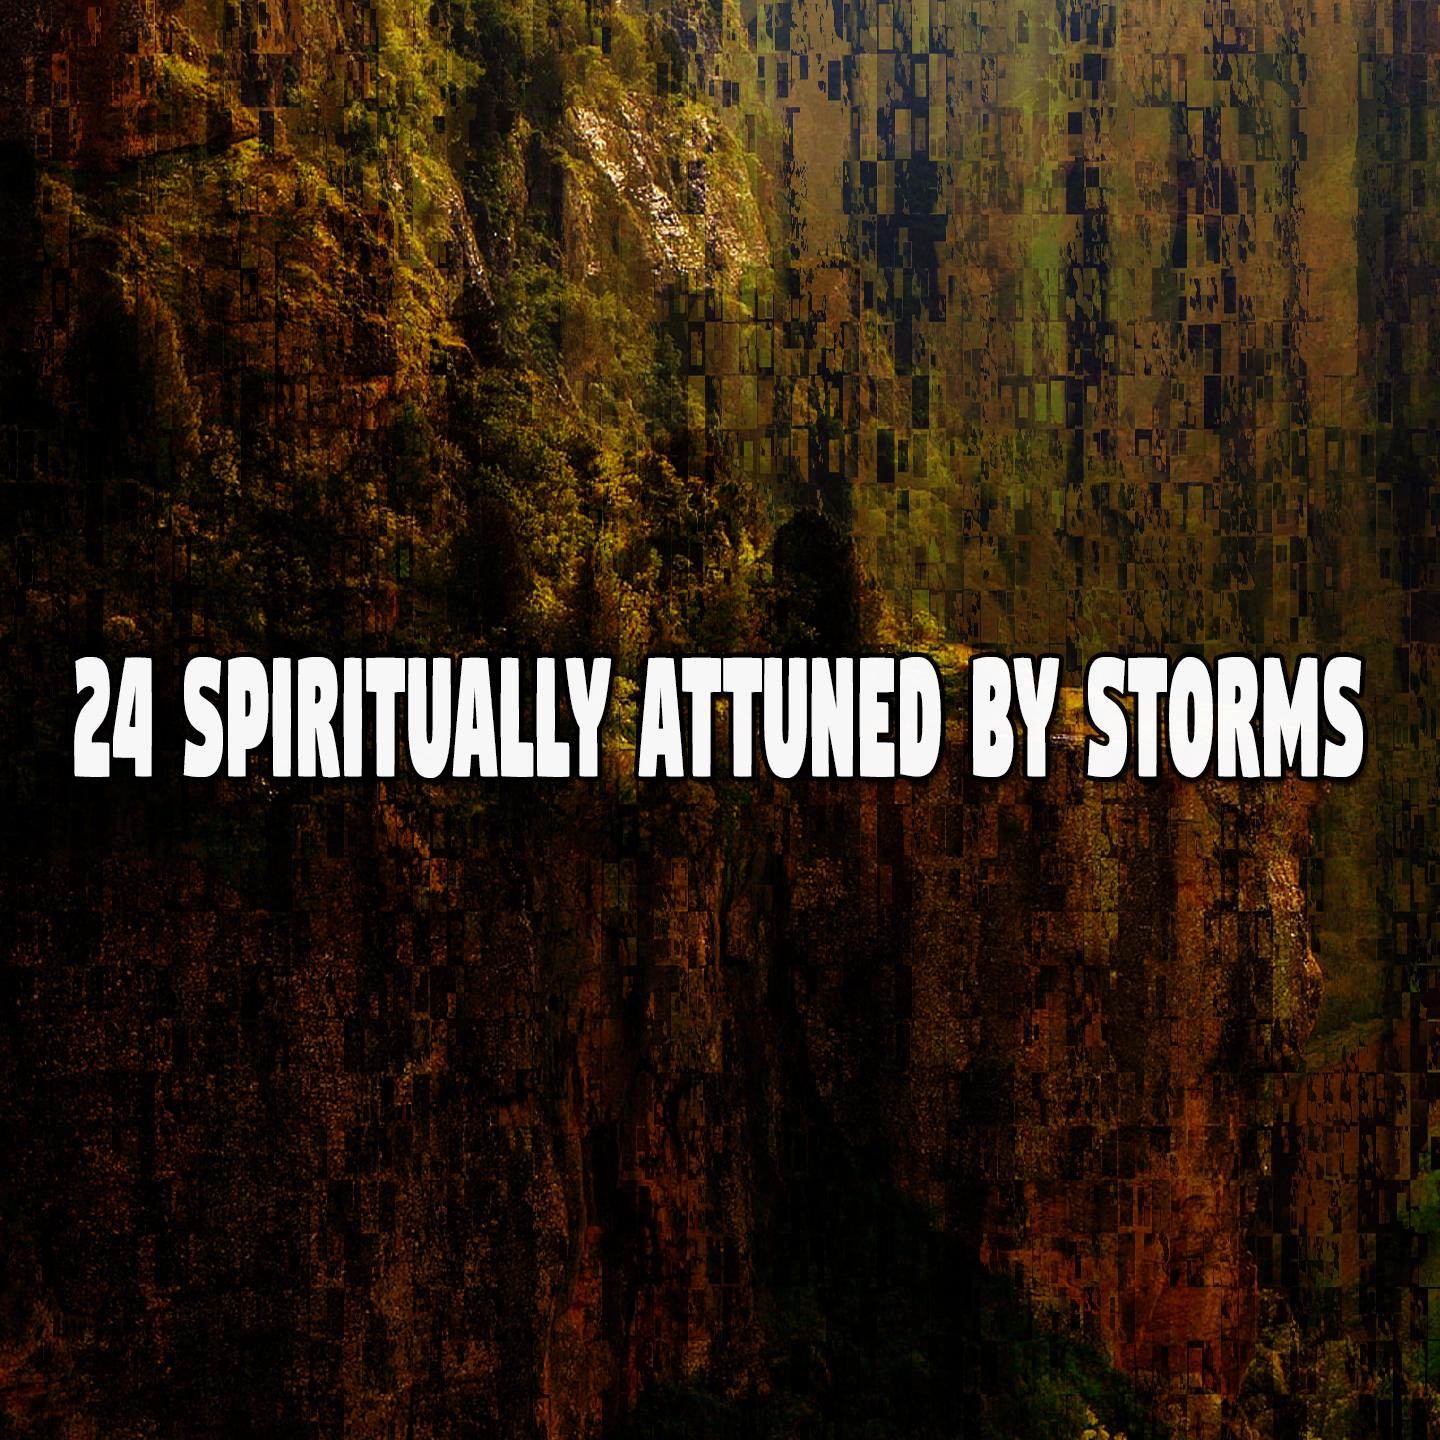 24 Spiritually Attuned by Storms